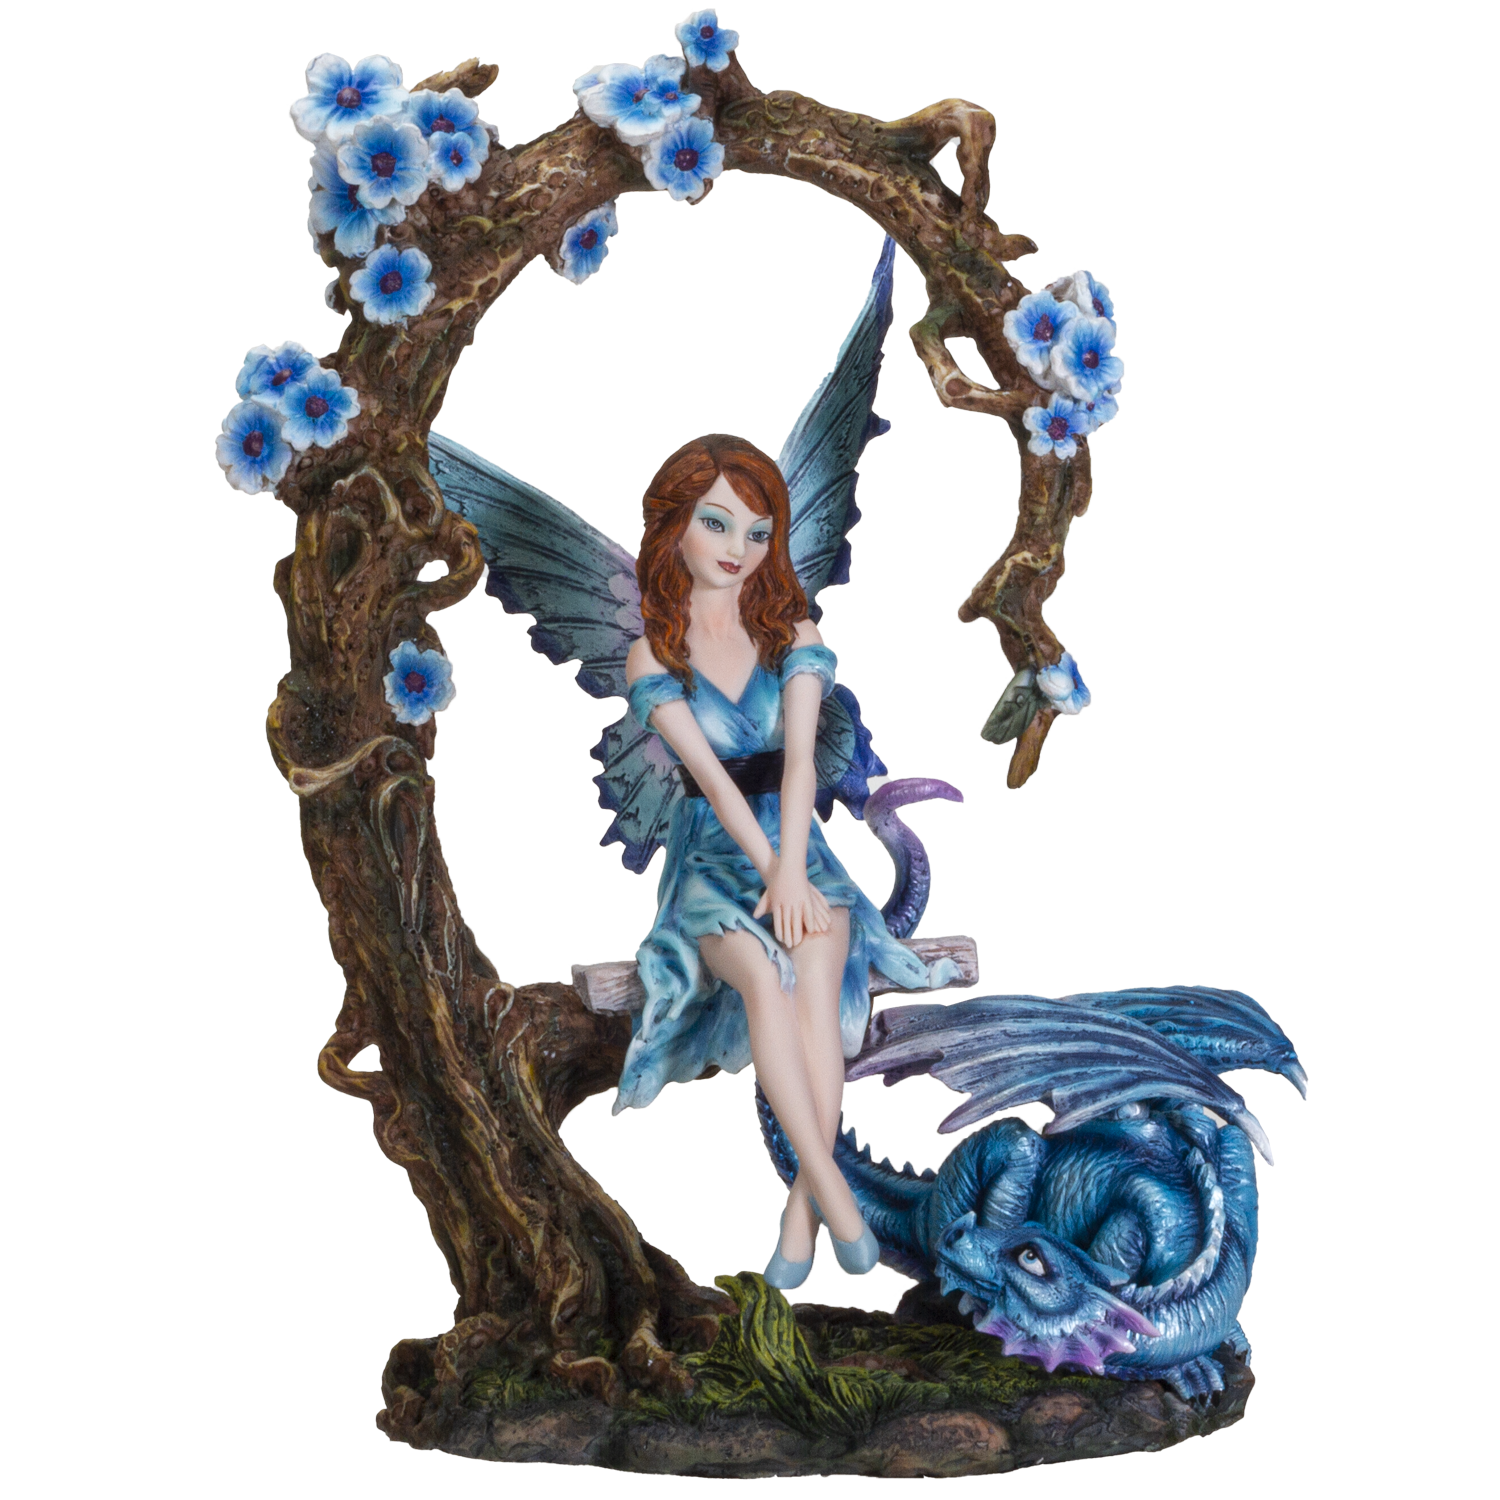 FairyTate Fantasy Fairy on the Swing with Dragon Decorative Resin Collectible Figurine Statue